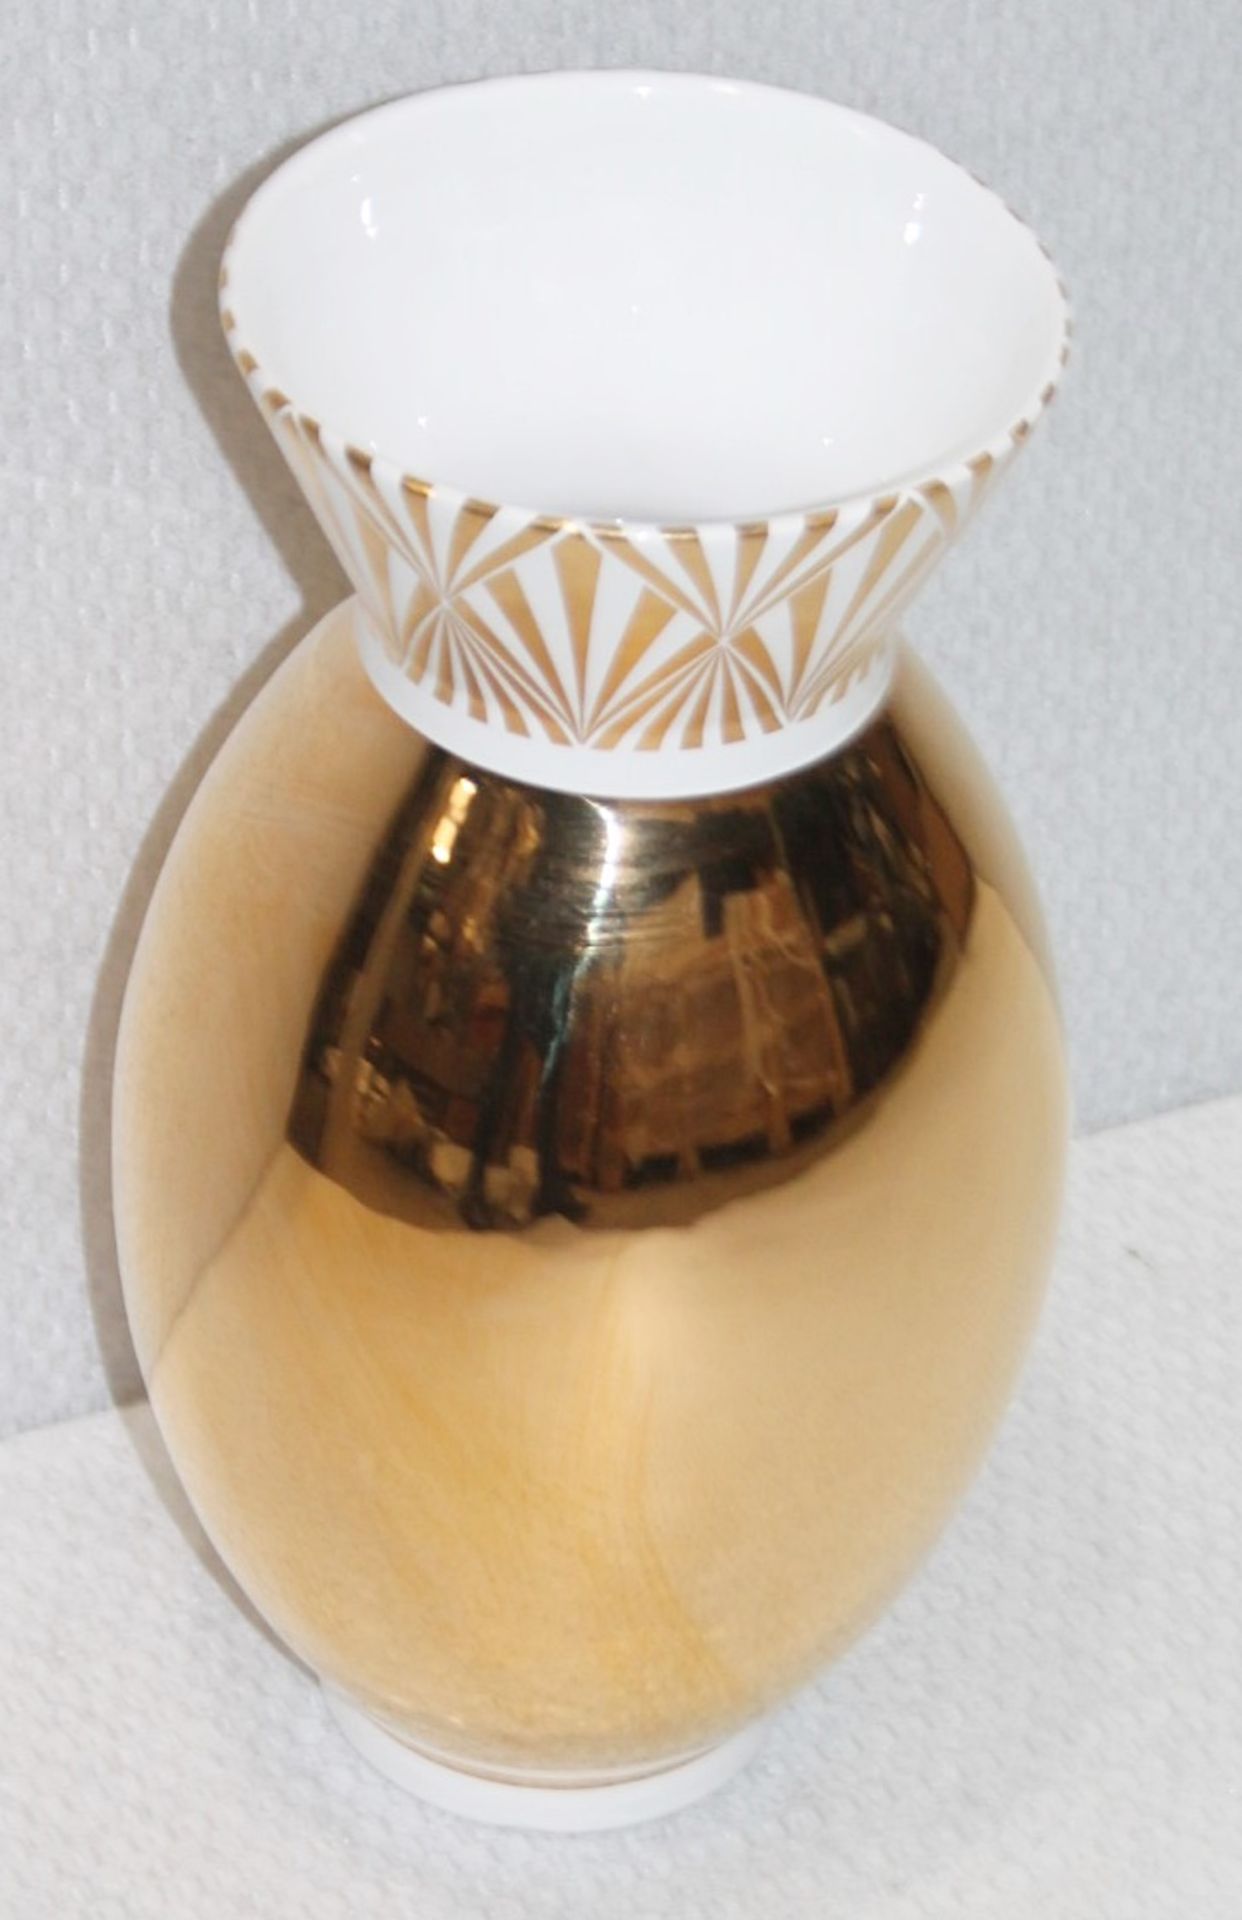 1 x VISIONNAIRE Large Luxury Vase Featuring An Art Deco Aesthetic And Gold Finish - Ref: HAS1588 - Image 3 of 3